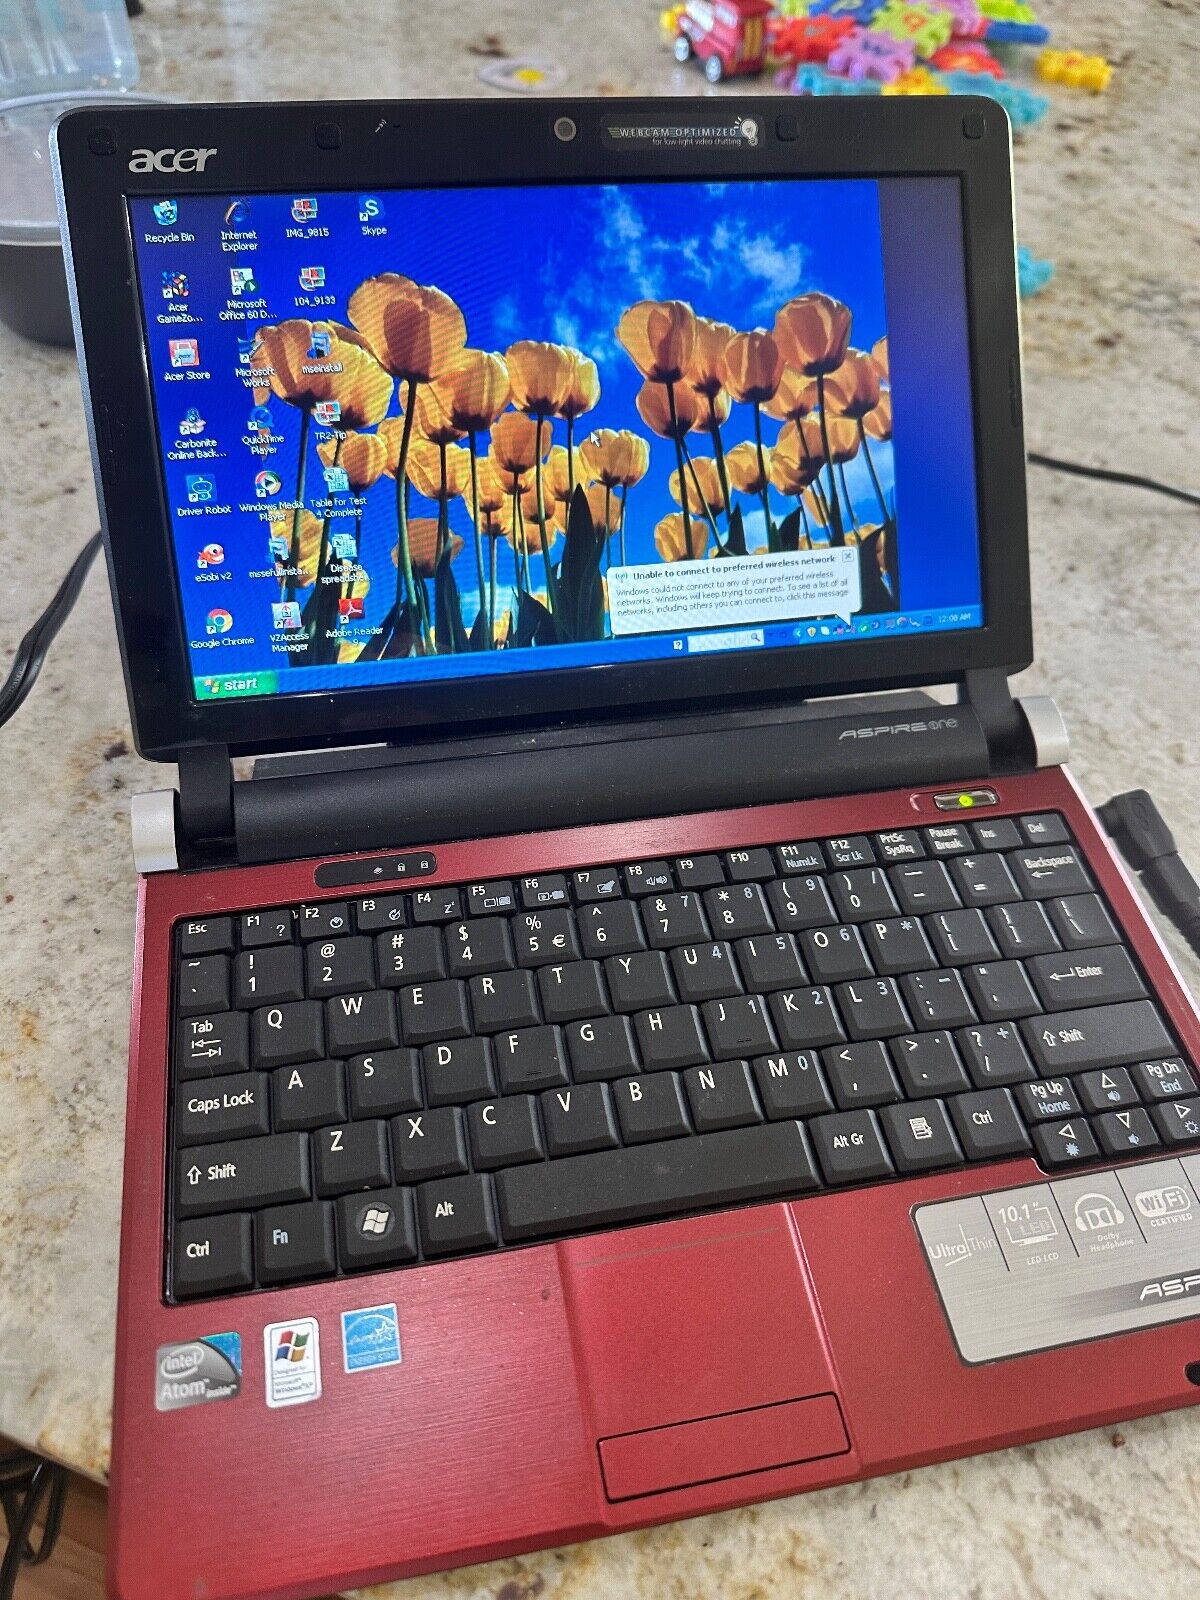 ACER Red Mini Laptop Computer Windows XP Home Edition WORKS w/power cord.